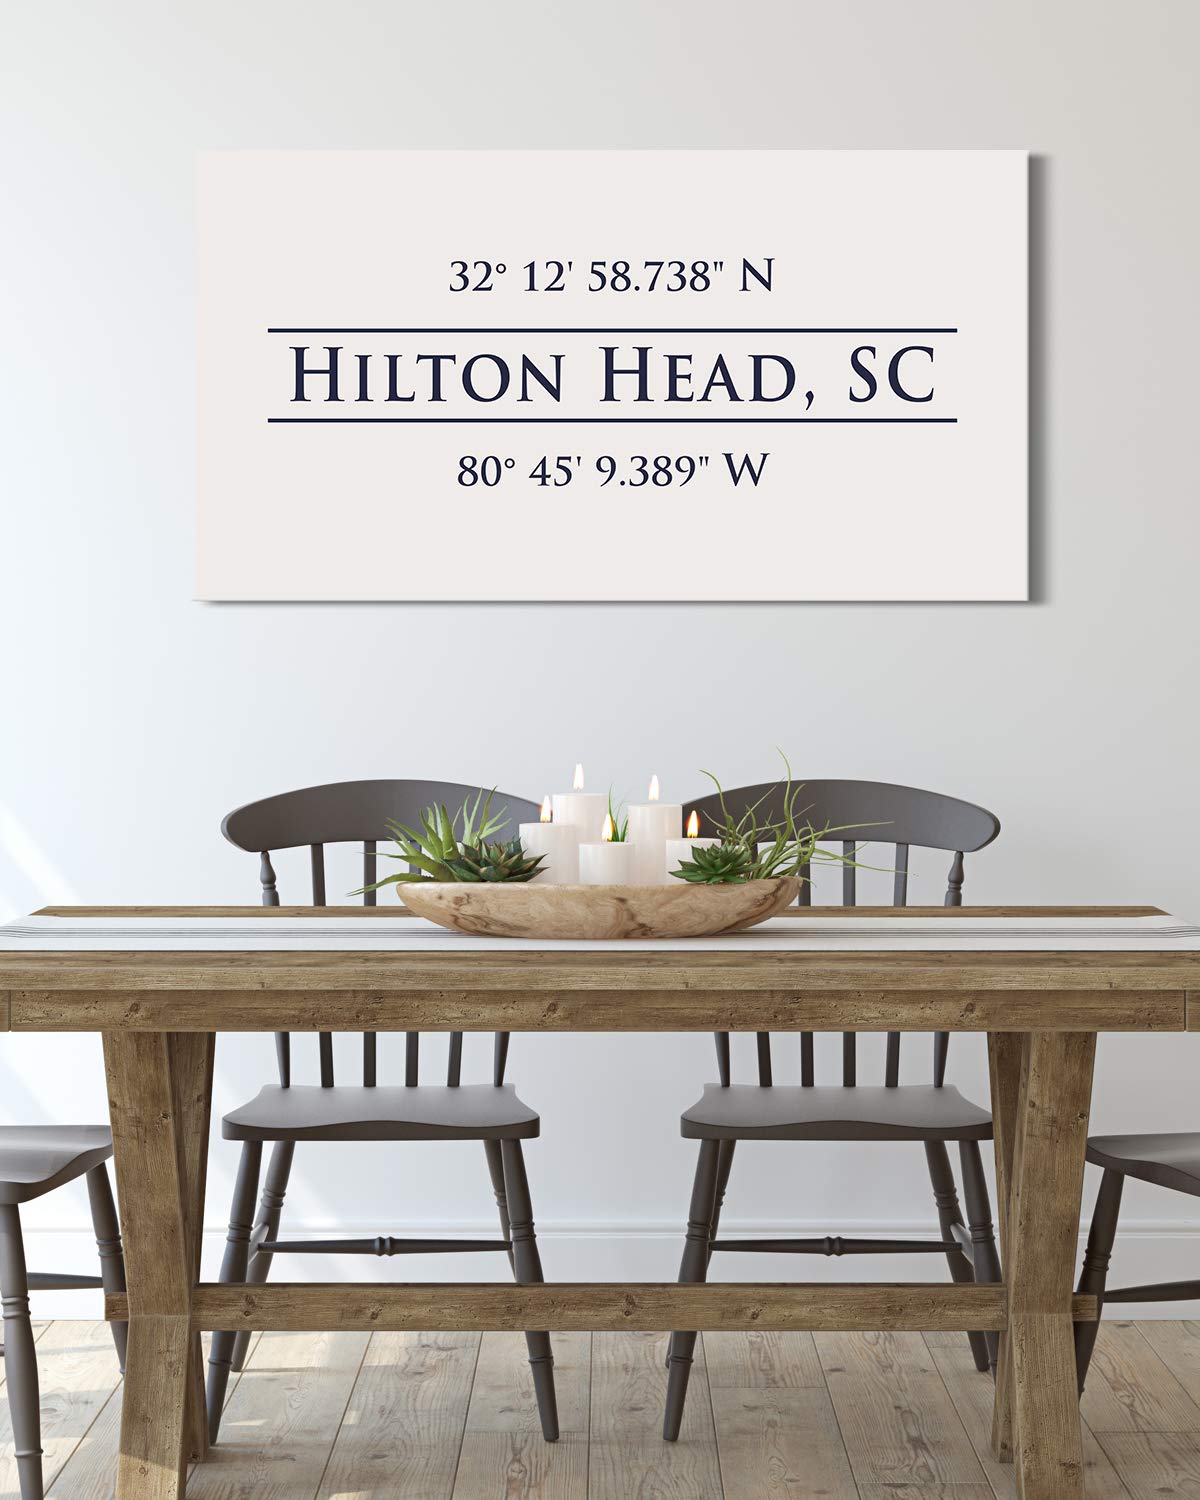 Hilton Head, SC 32° 12' 58.738" N, 80° 45' 9.389" W - Wall Decor Art Canvas with an offwhite background - Ready to Hang - Great for above a couch, table, bed or more